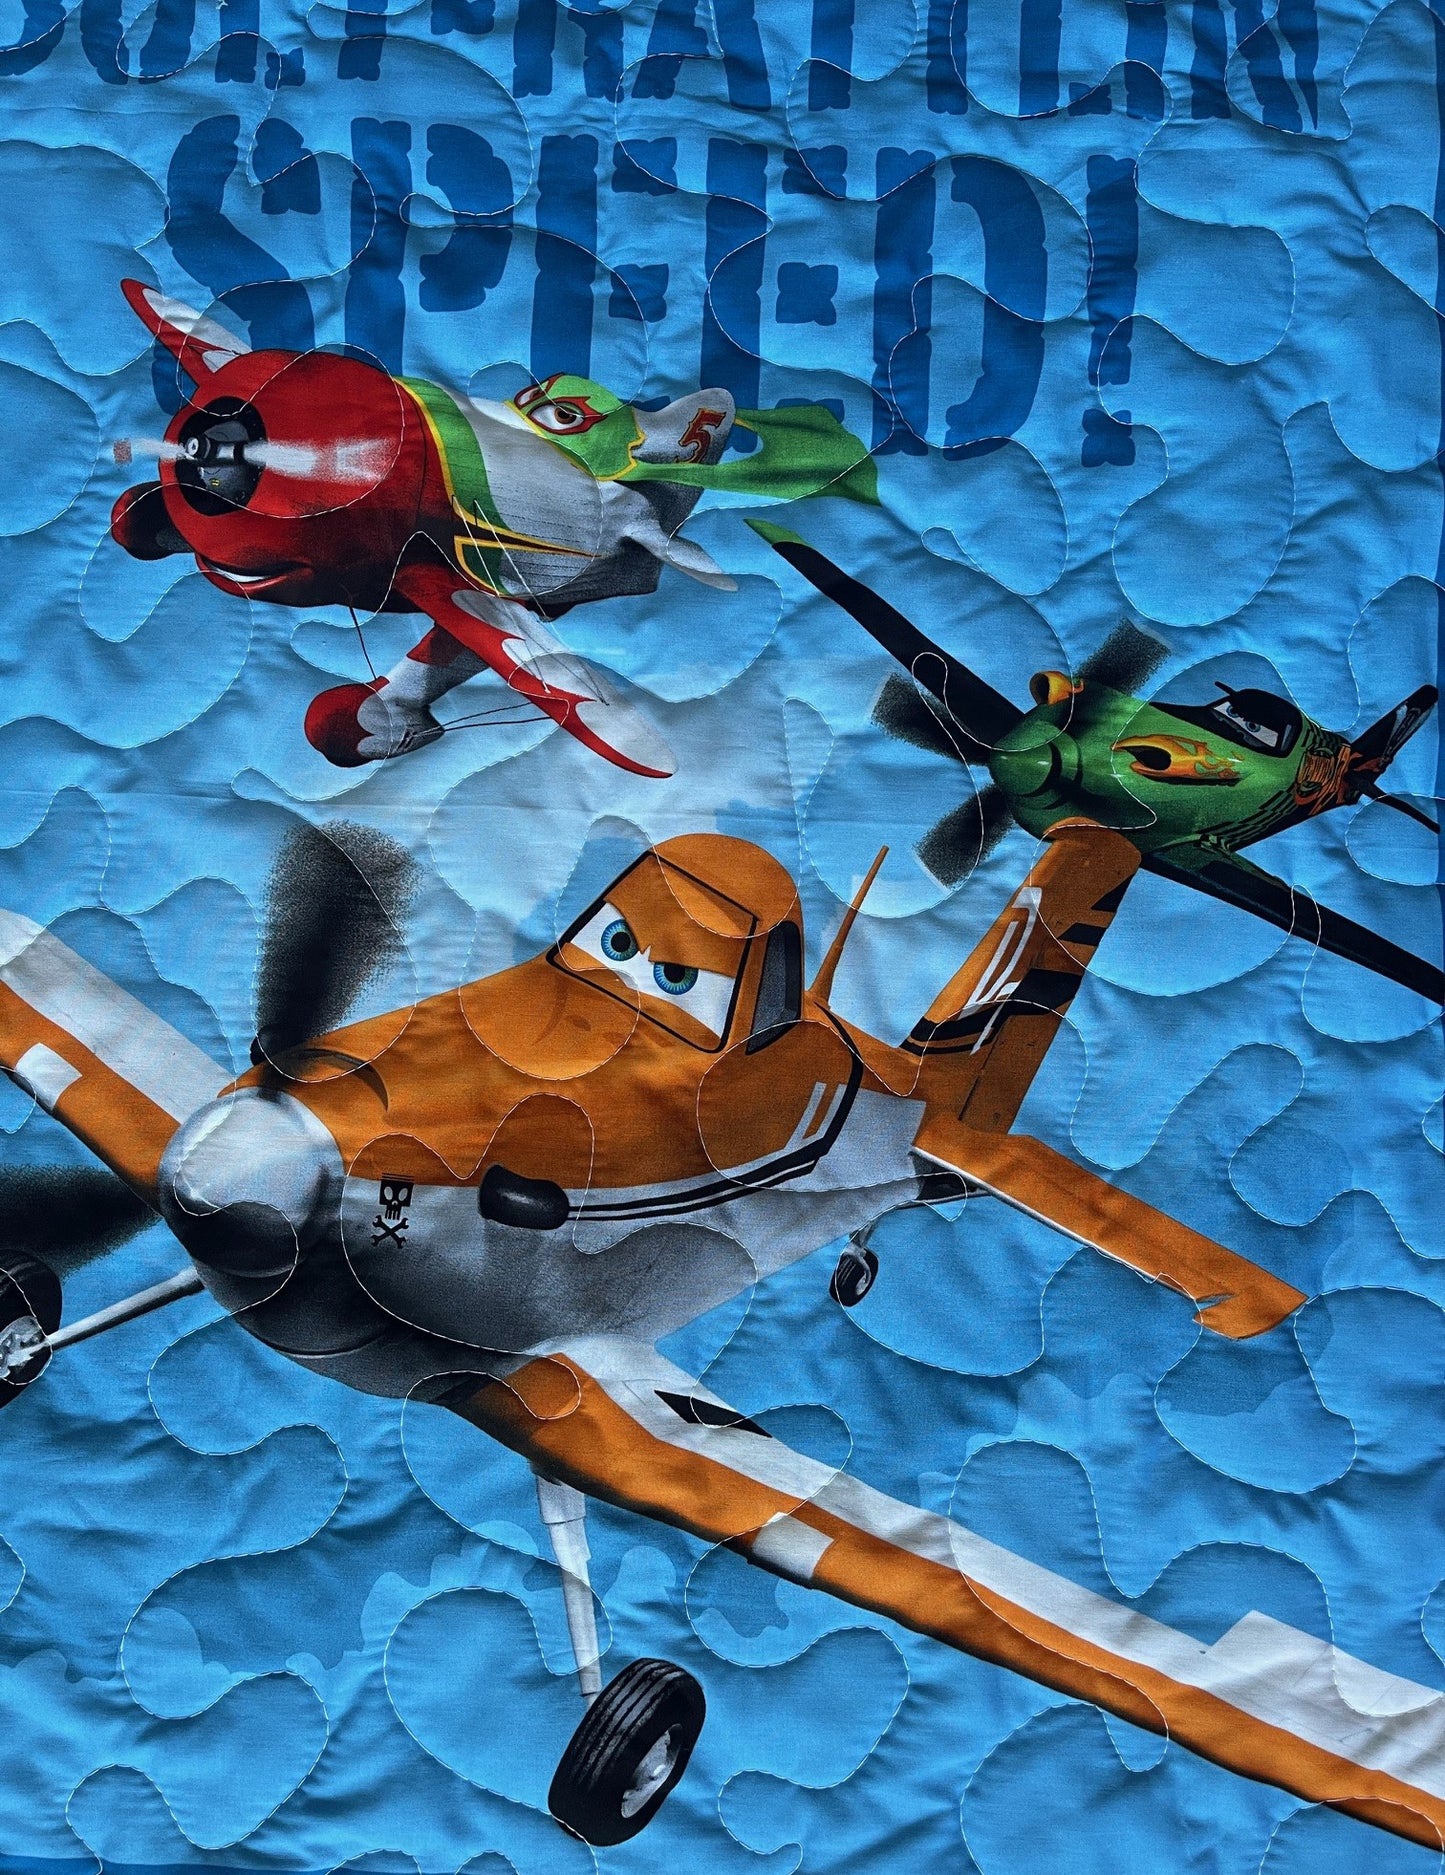 DISNEY PLANES *BOLT RATTLIN' SPEED* INSPIRED AIRPLANE QUILTED BLANKET